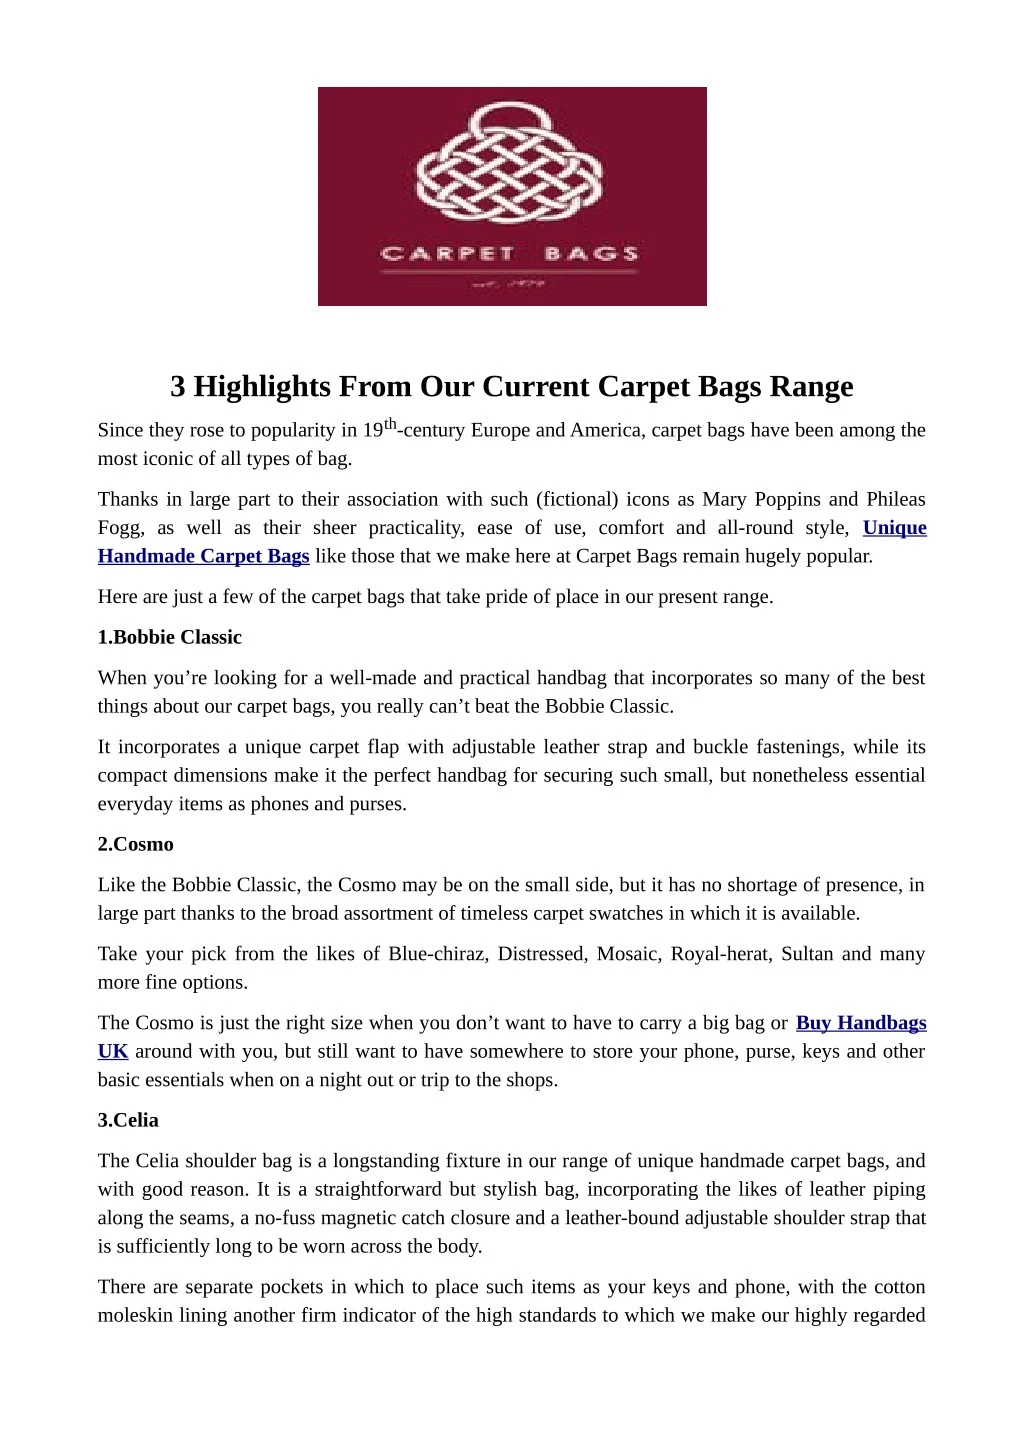 3 highlights from our current carpet bags range